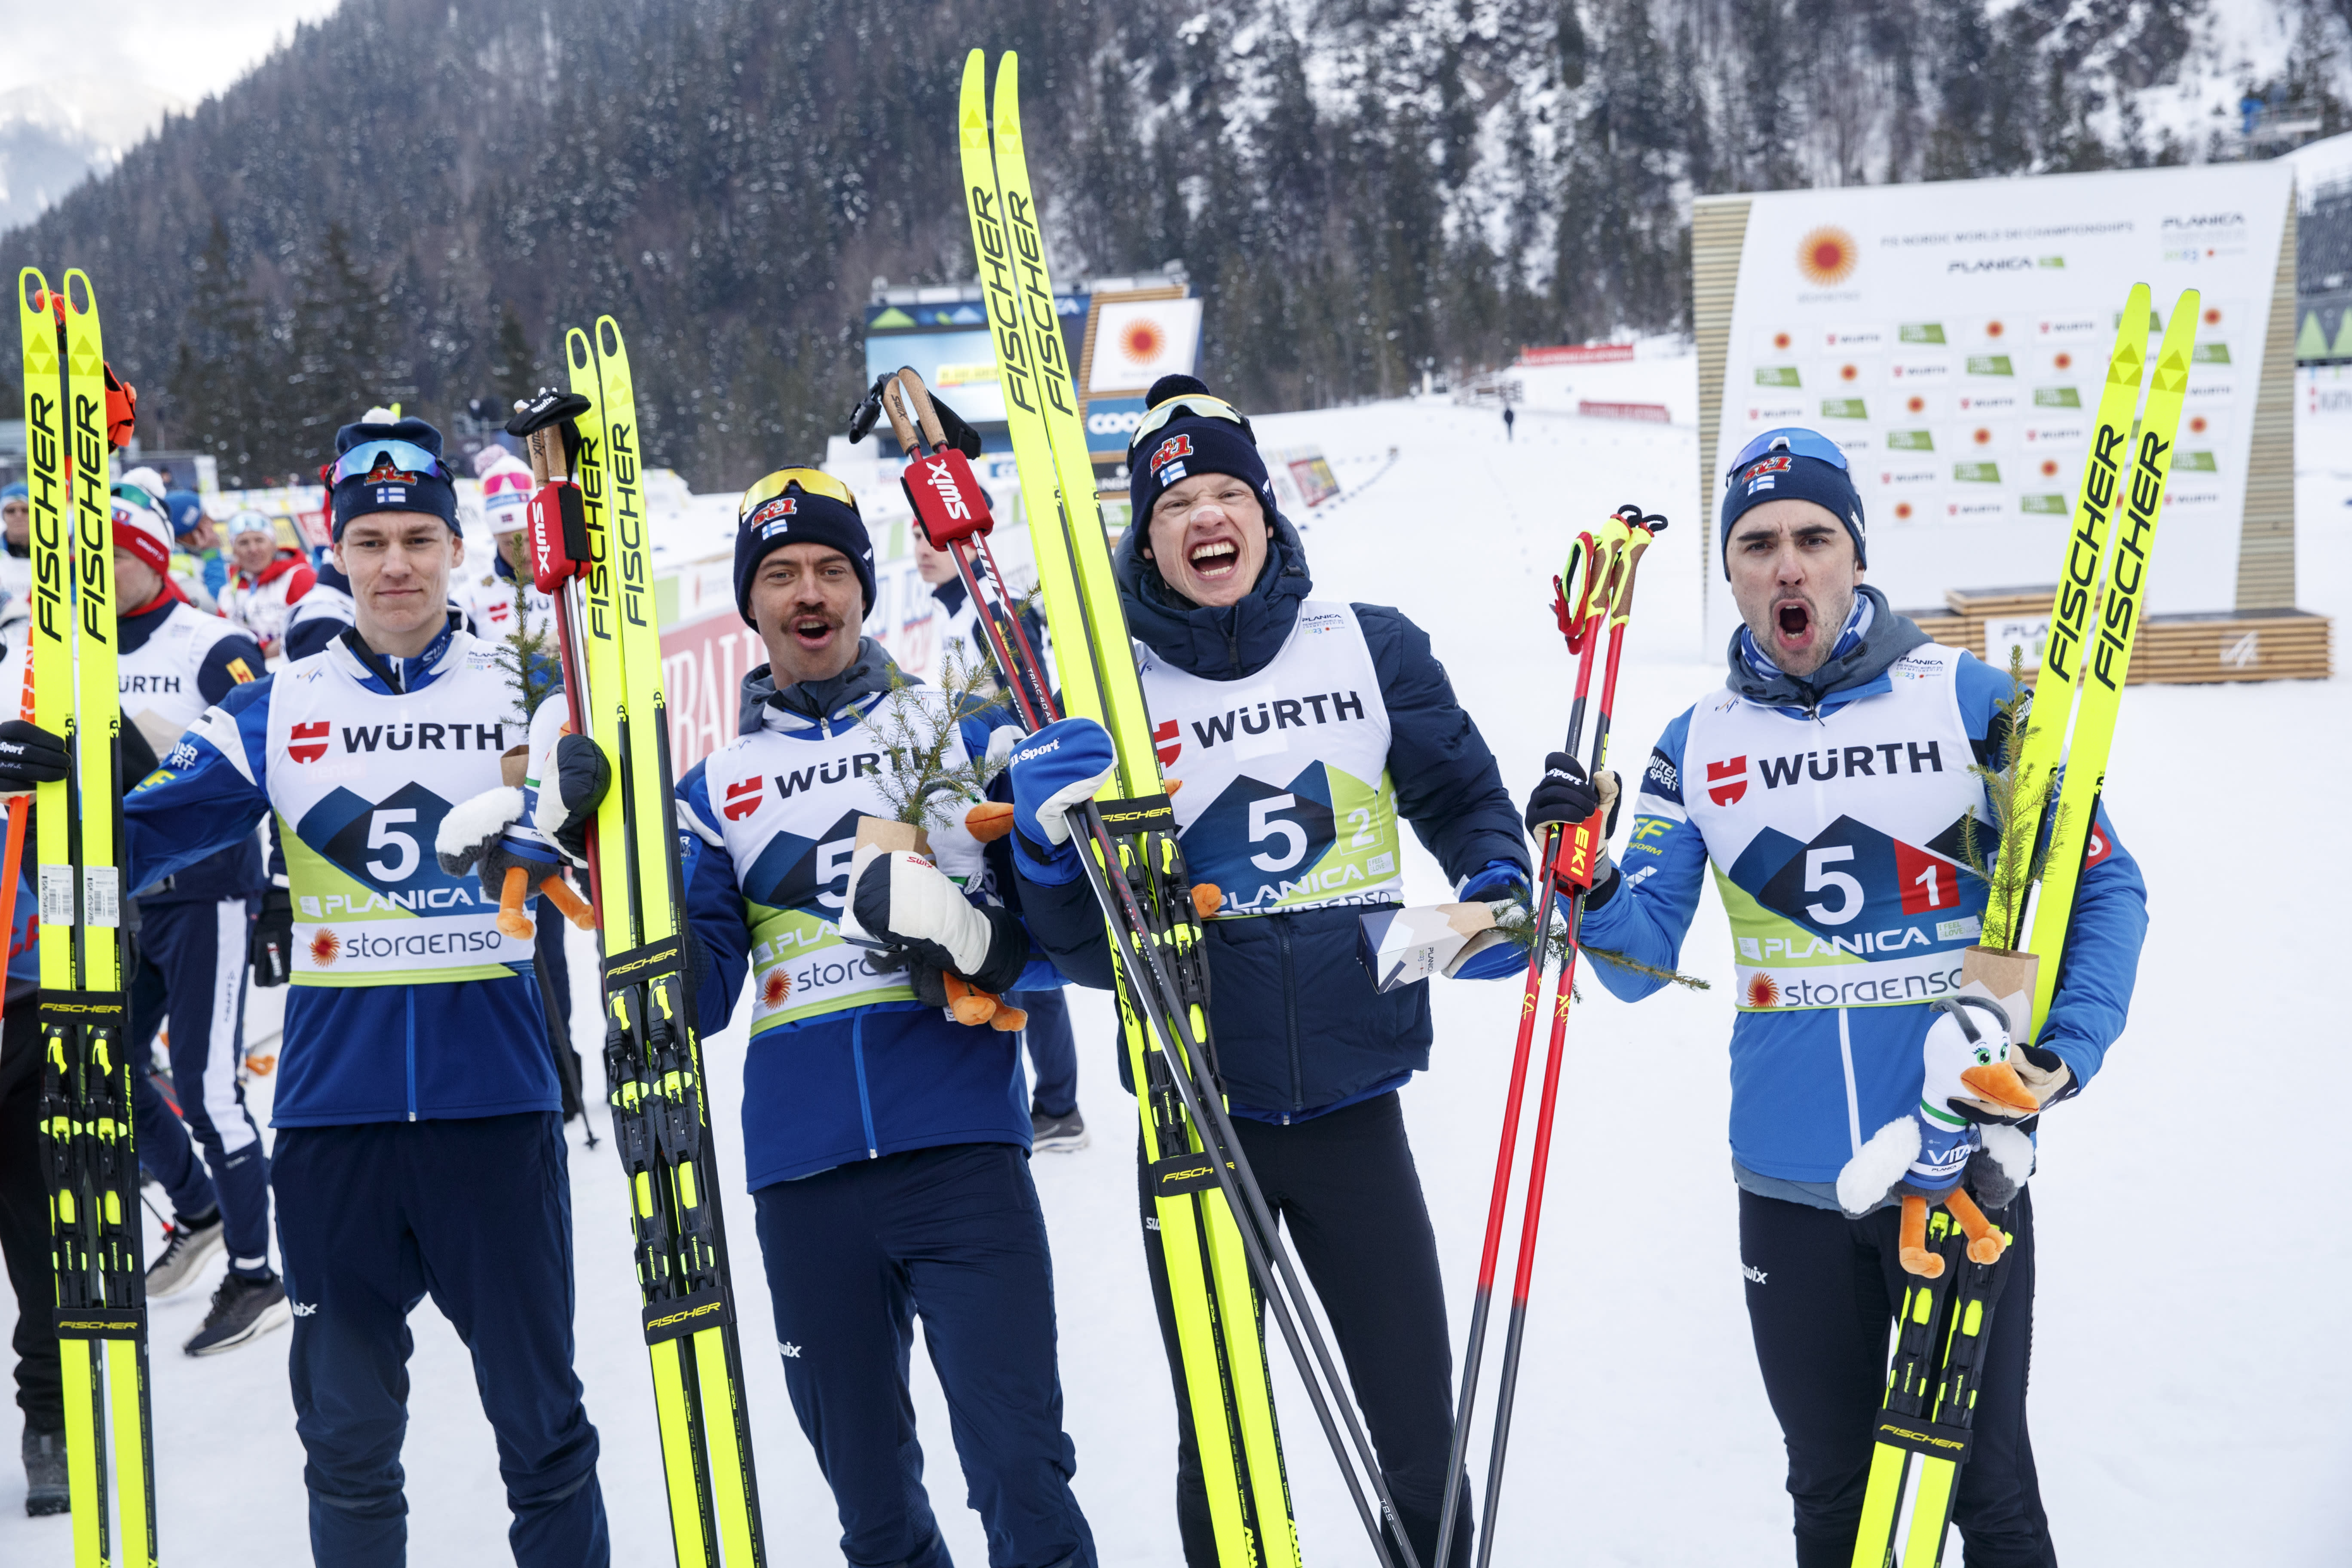 The Finns ski for historic medals on the World Cup weekend